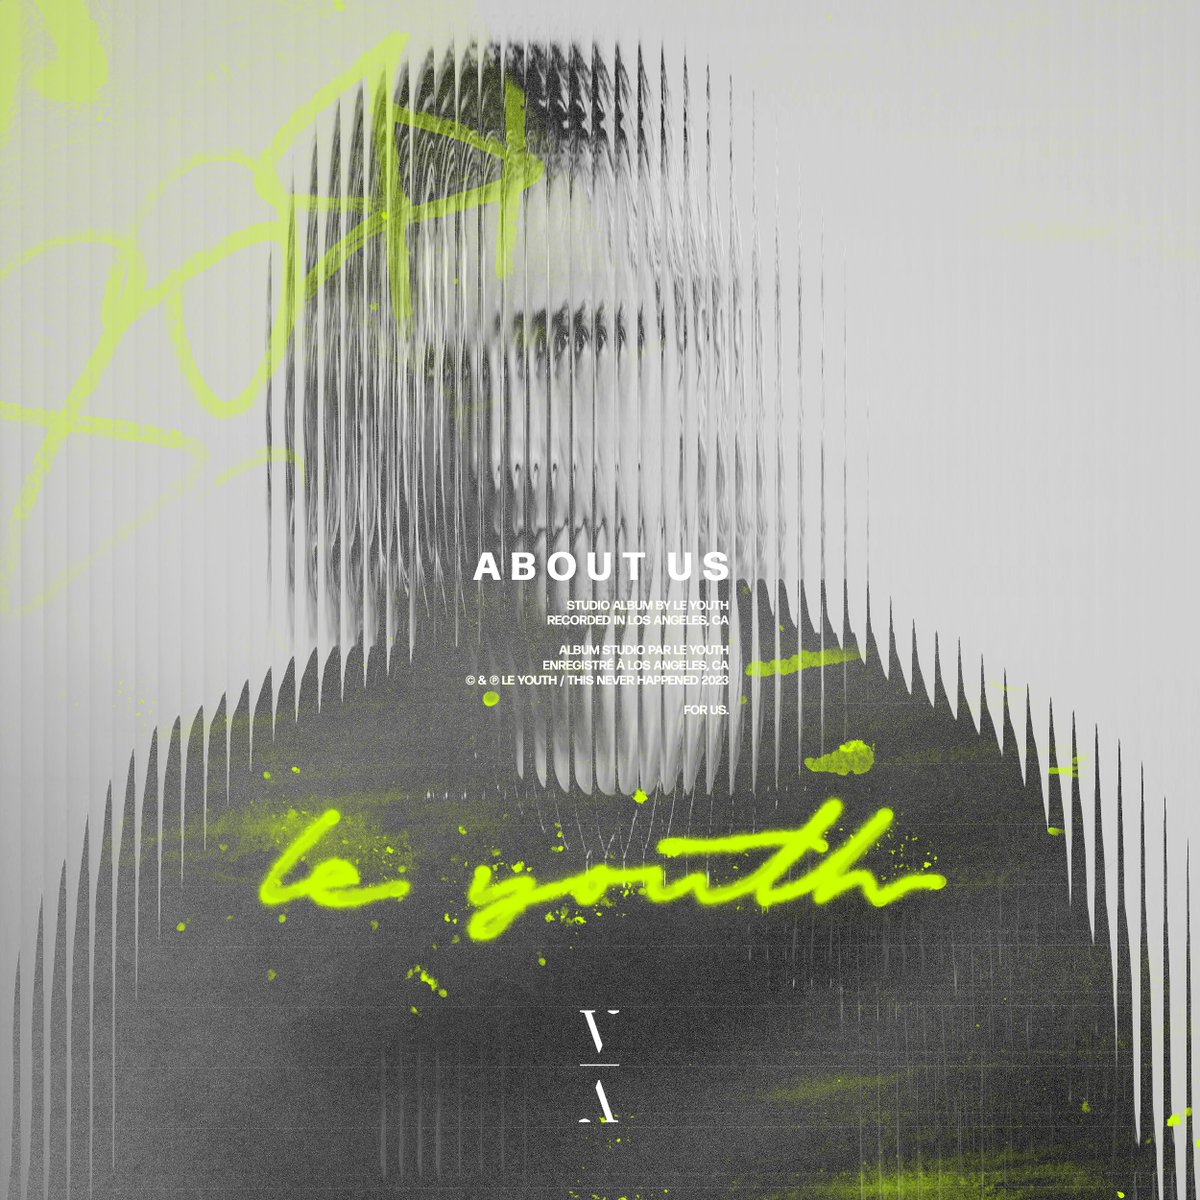 Tomorrow, @leyouth releases his latest album, 'About Us'. Pre save the record and be amongst the first to listen tomorrow when it's live. Pre Save: thisneverhappened.ffm.to/abus